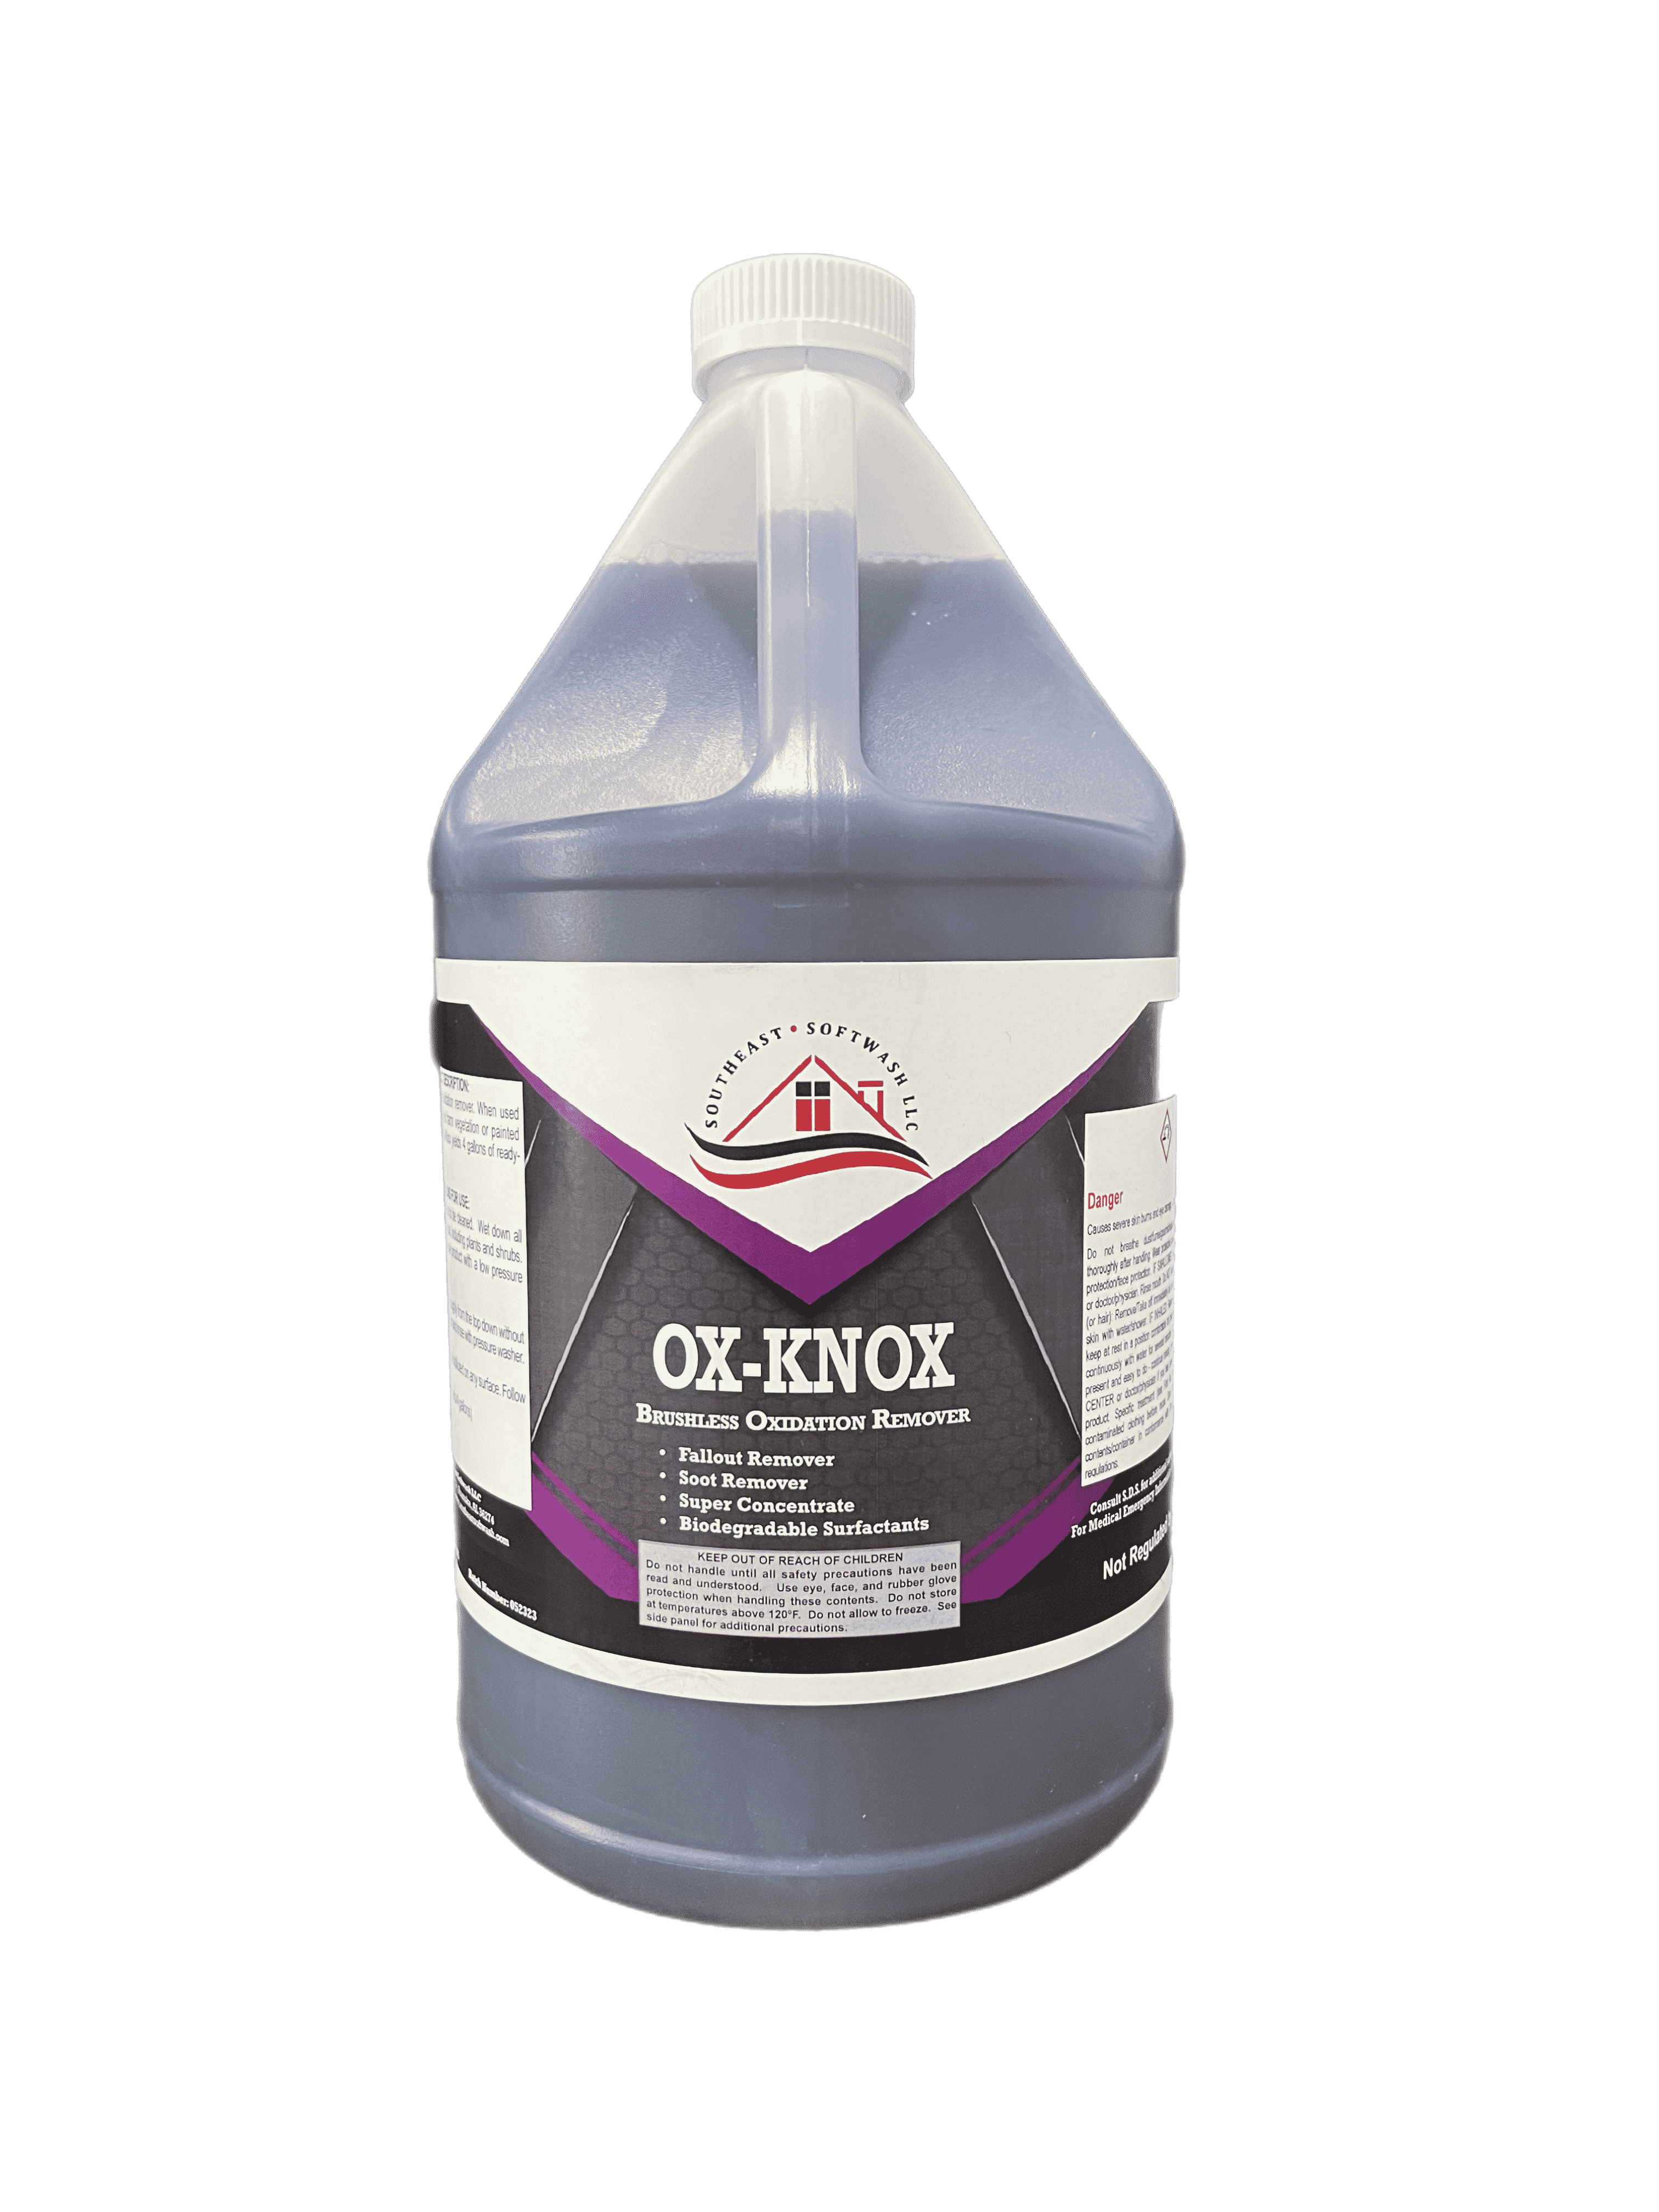 Southeast Softwash OX-KNOX BRUSHLESS OXIDATION REMOVER